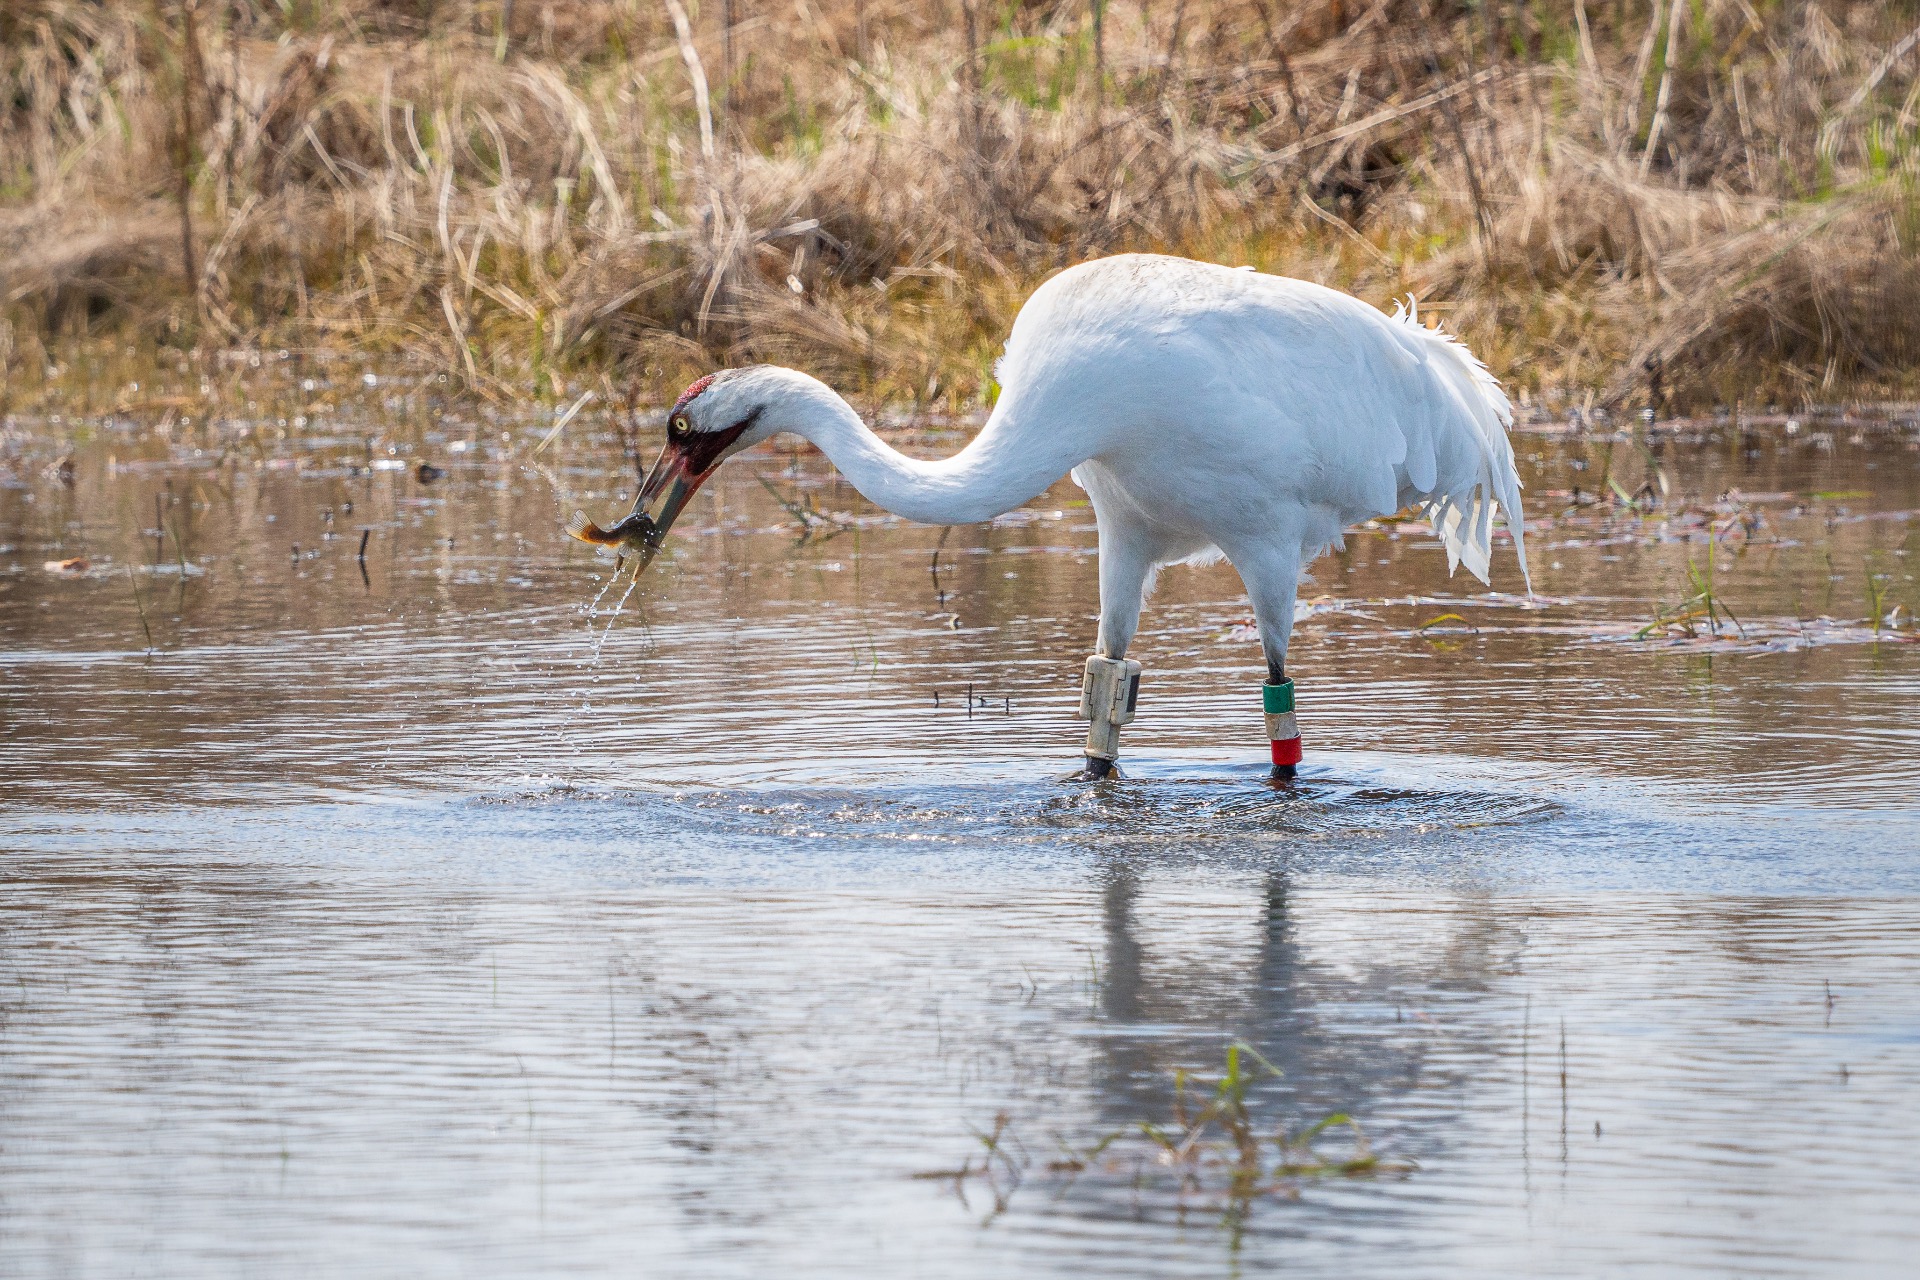 An adult Whooping Crane stands in a pool of water with a fish in its beak.